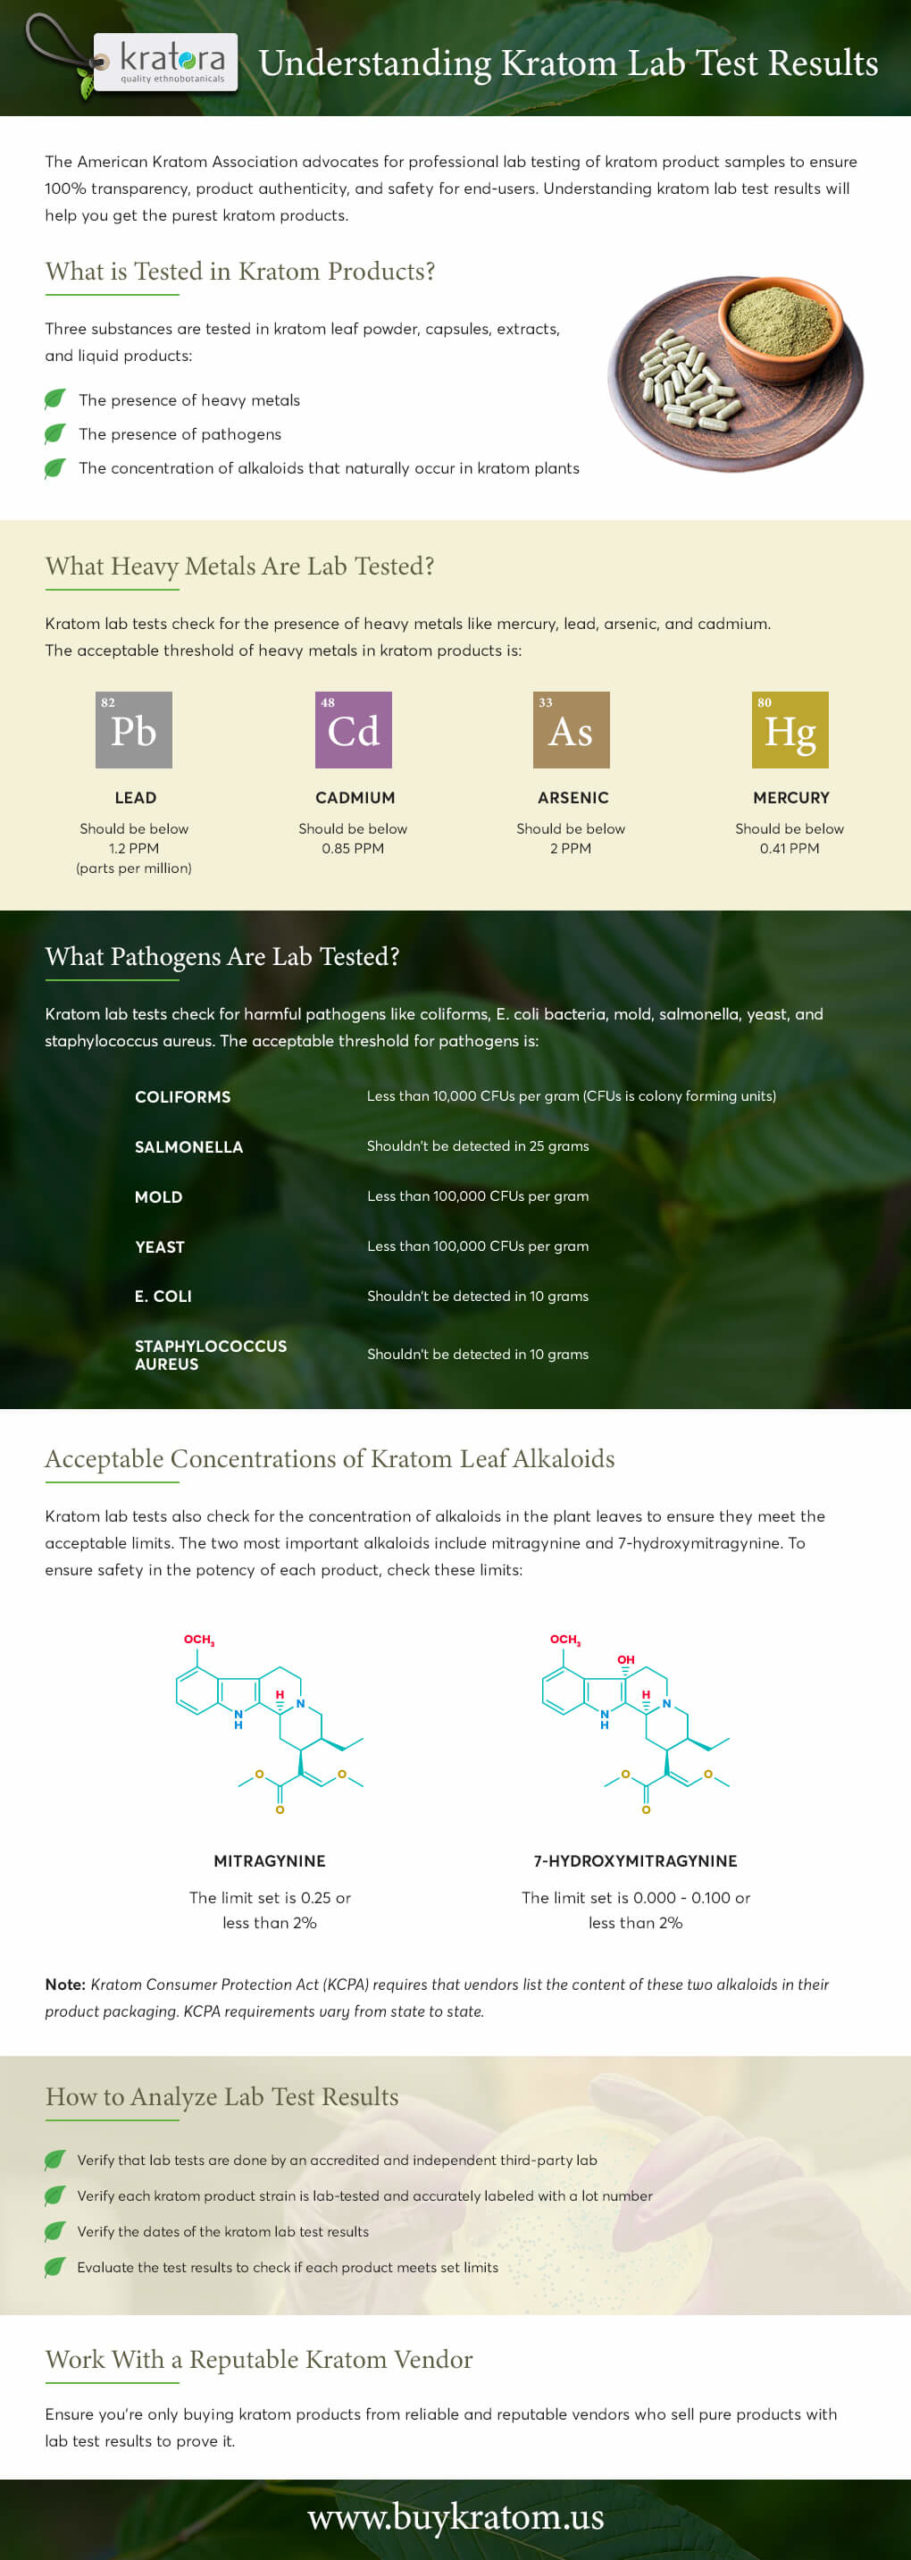 Infographic about kratom lab testing, including testing procedures and the contaminants tested for. 